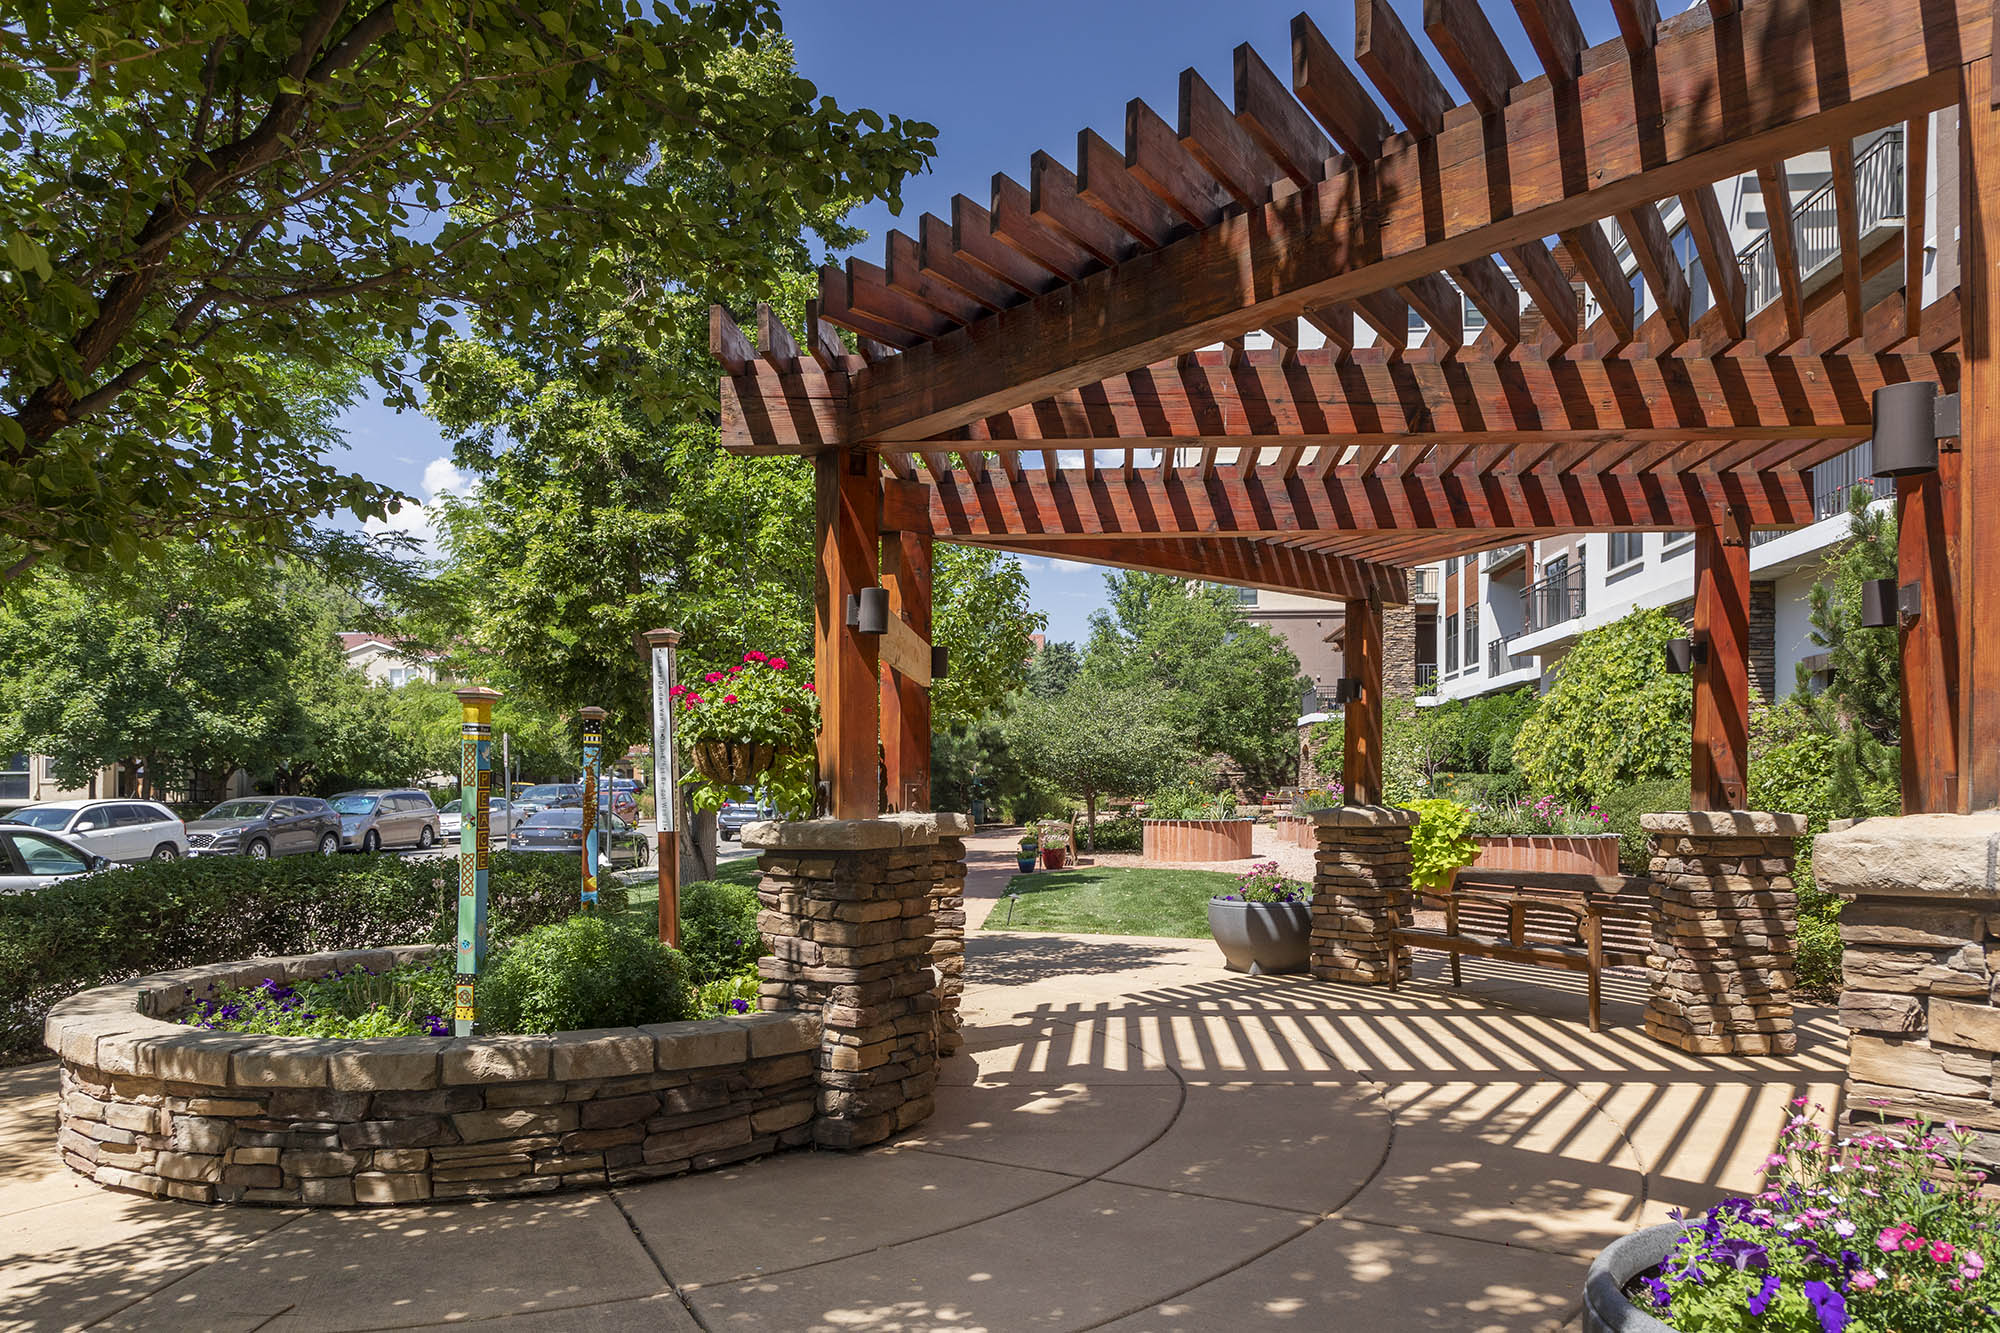 wood and stone Pergola shade structure in garden at Carillon in Boulder